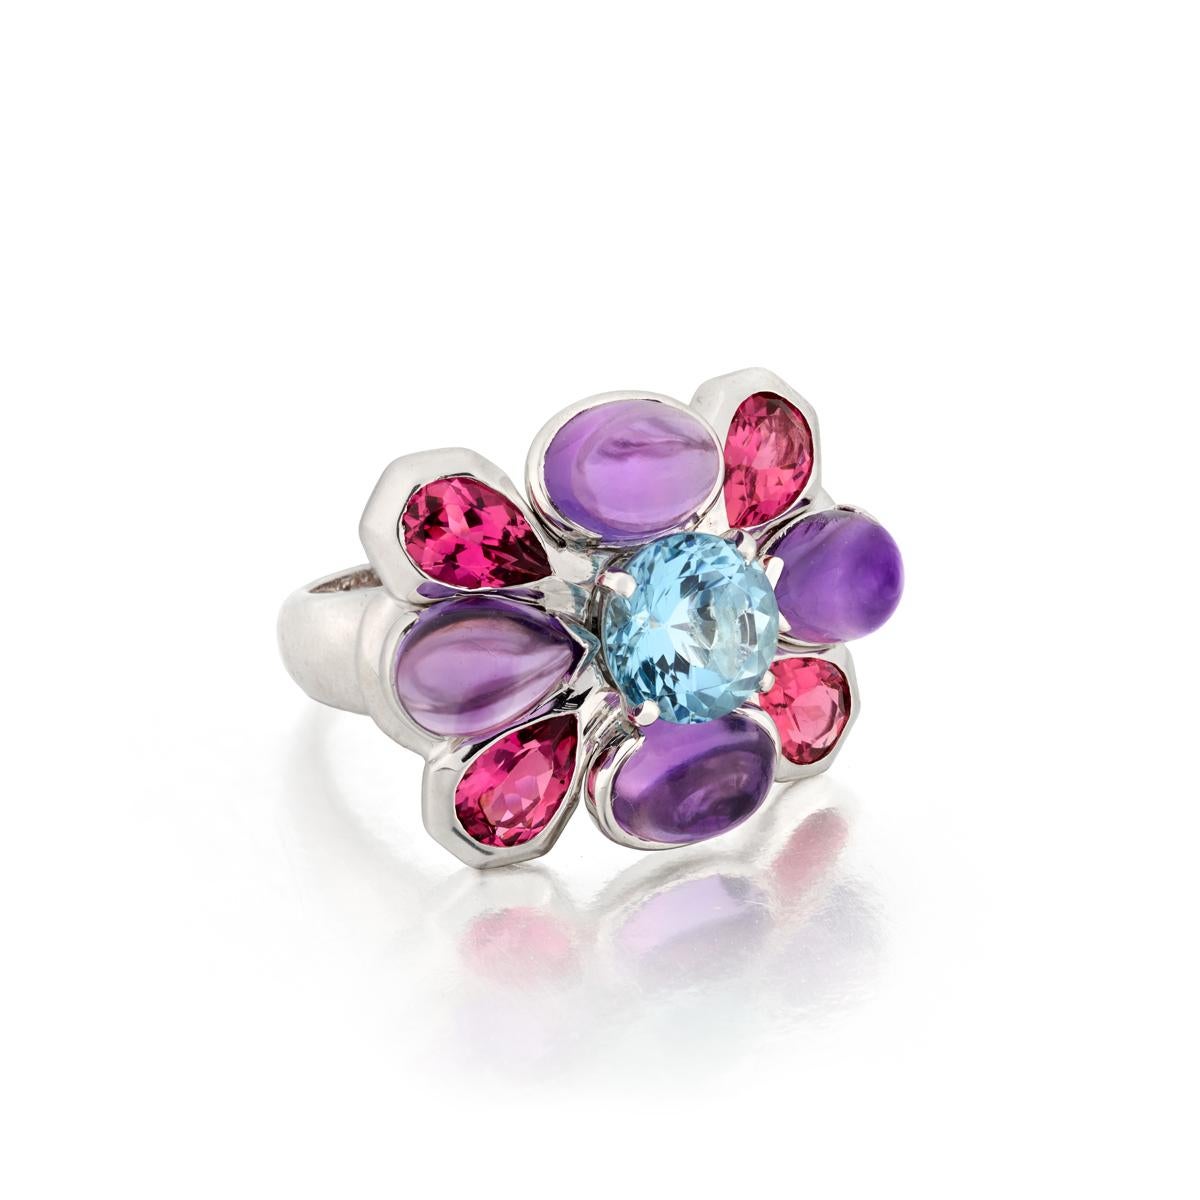 Chanel ring composed of 18K white gold with multi-gemstones.  The ring is marked 